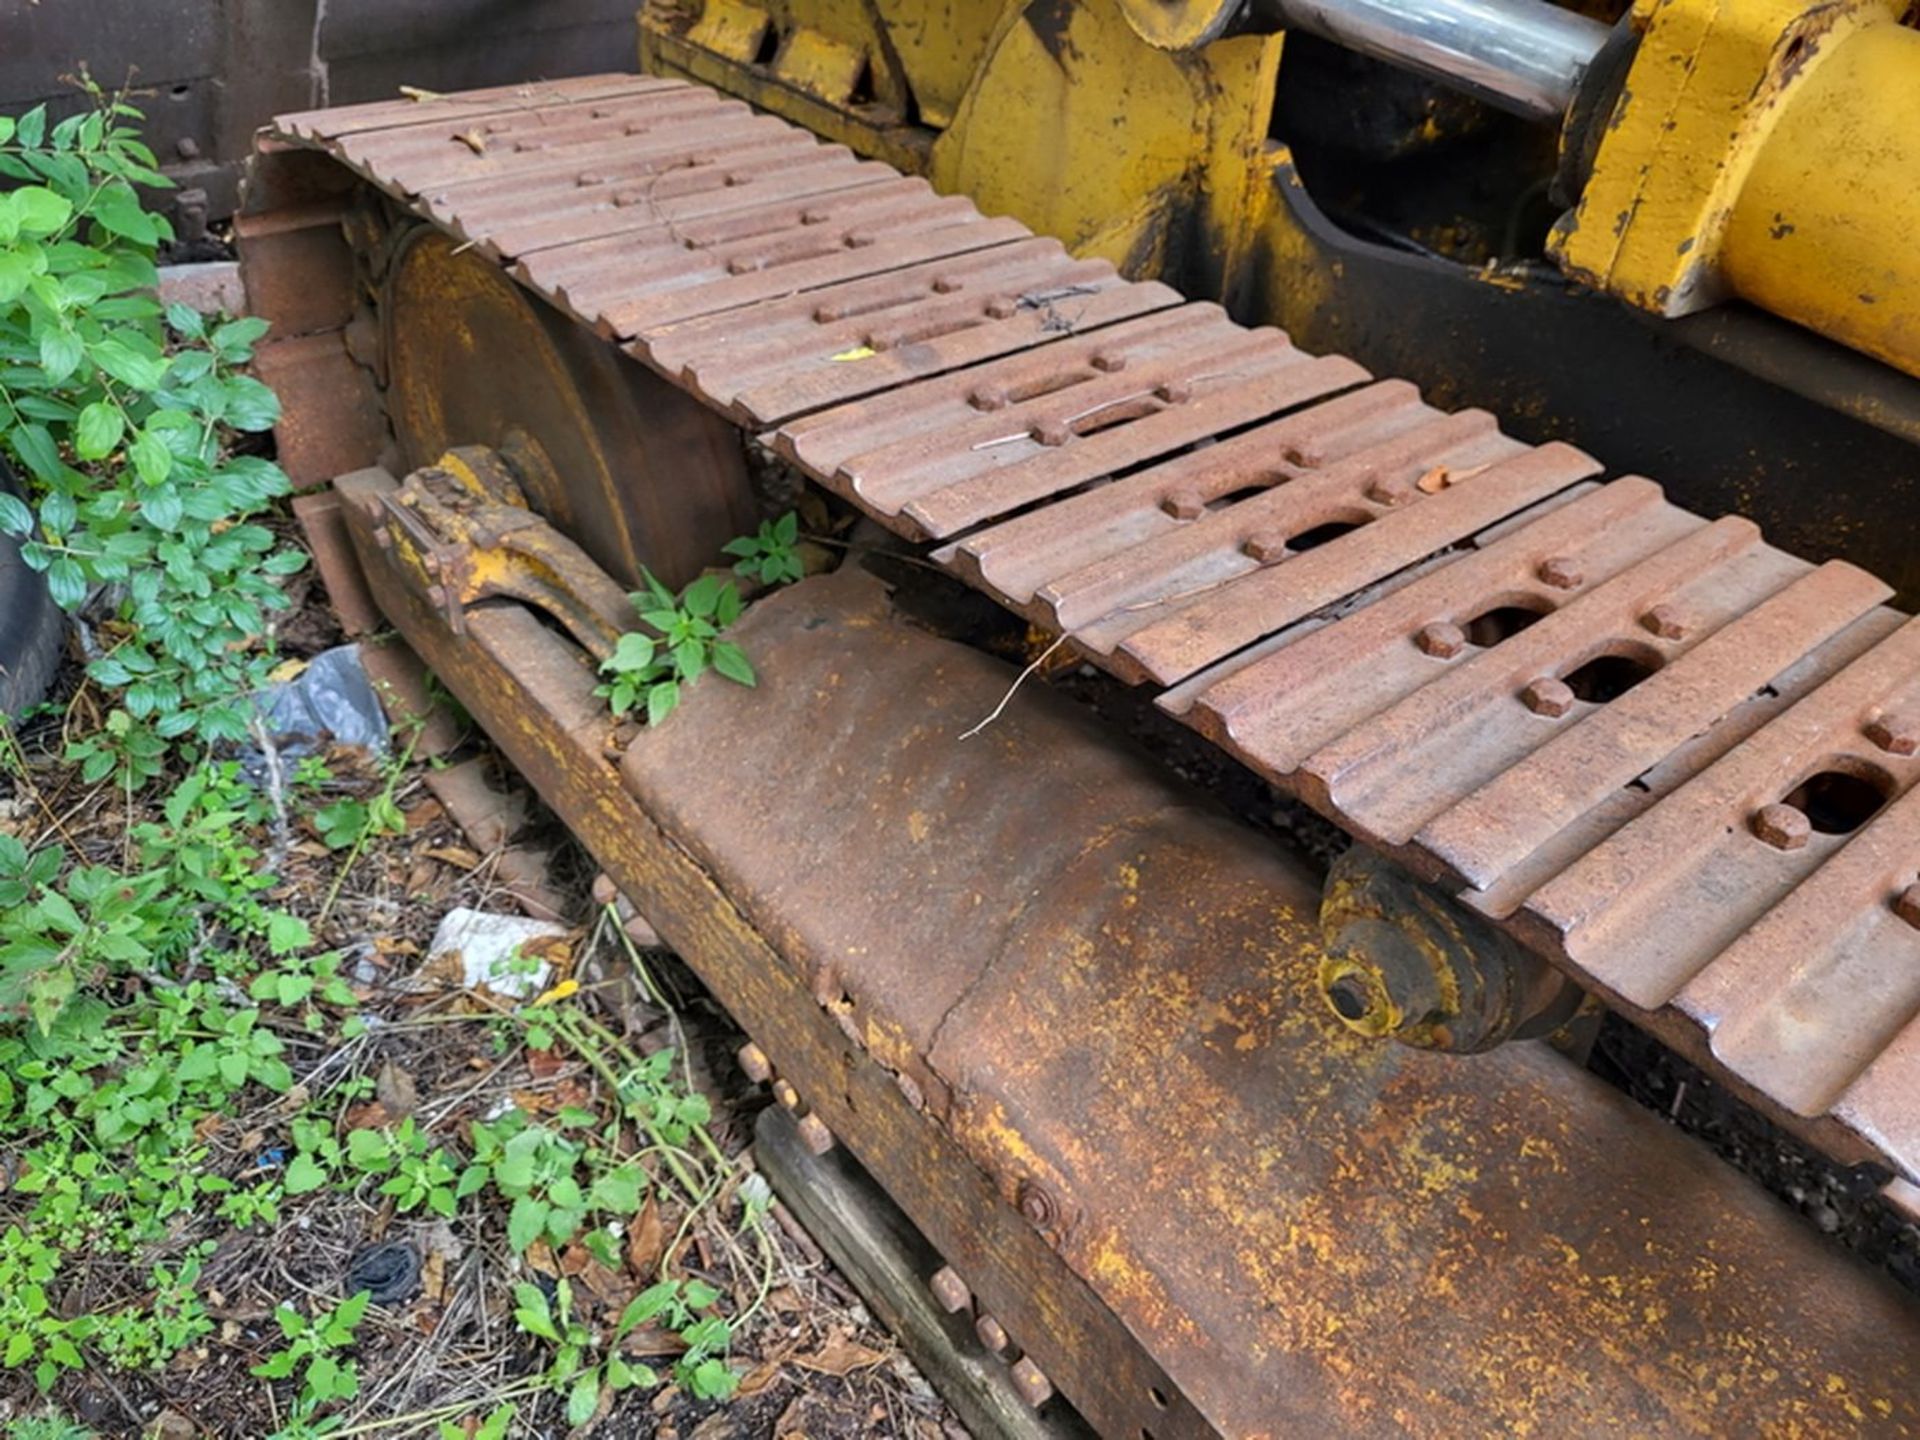 1957 Cat 955 Crawler Dozer, Adjustable Bucket (Needs Service) (Sold - Subject to Approval) - Image 7 of 8